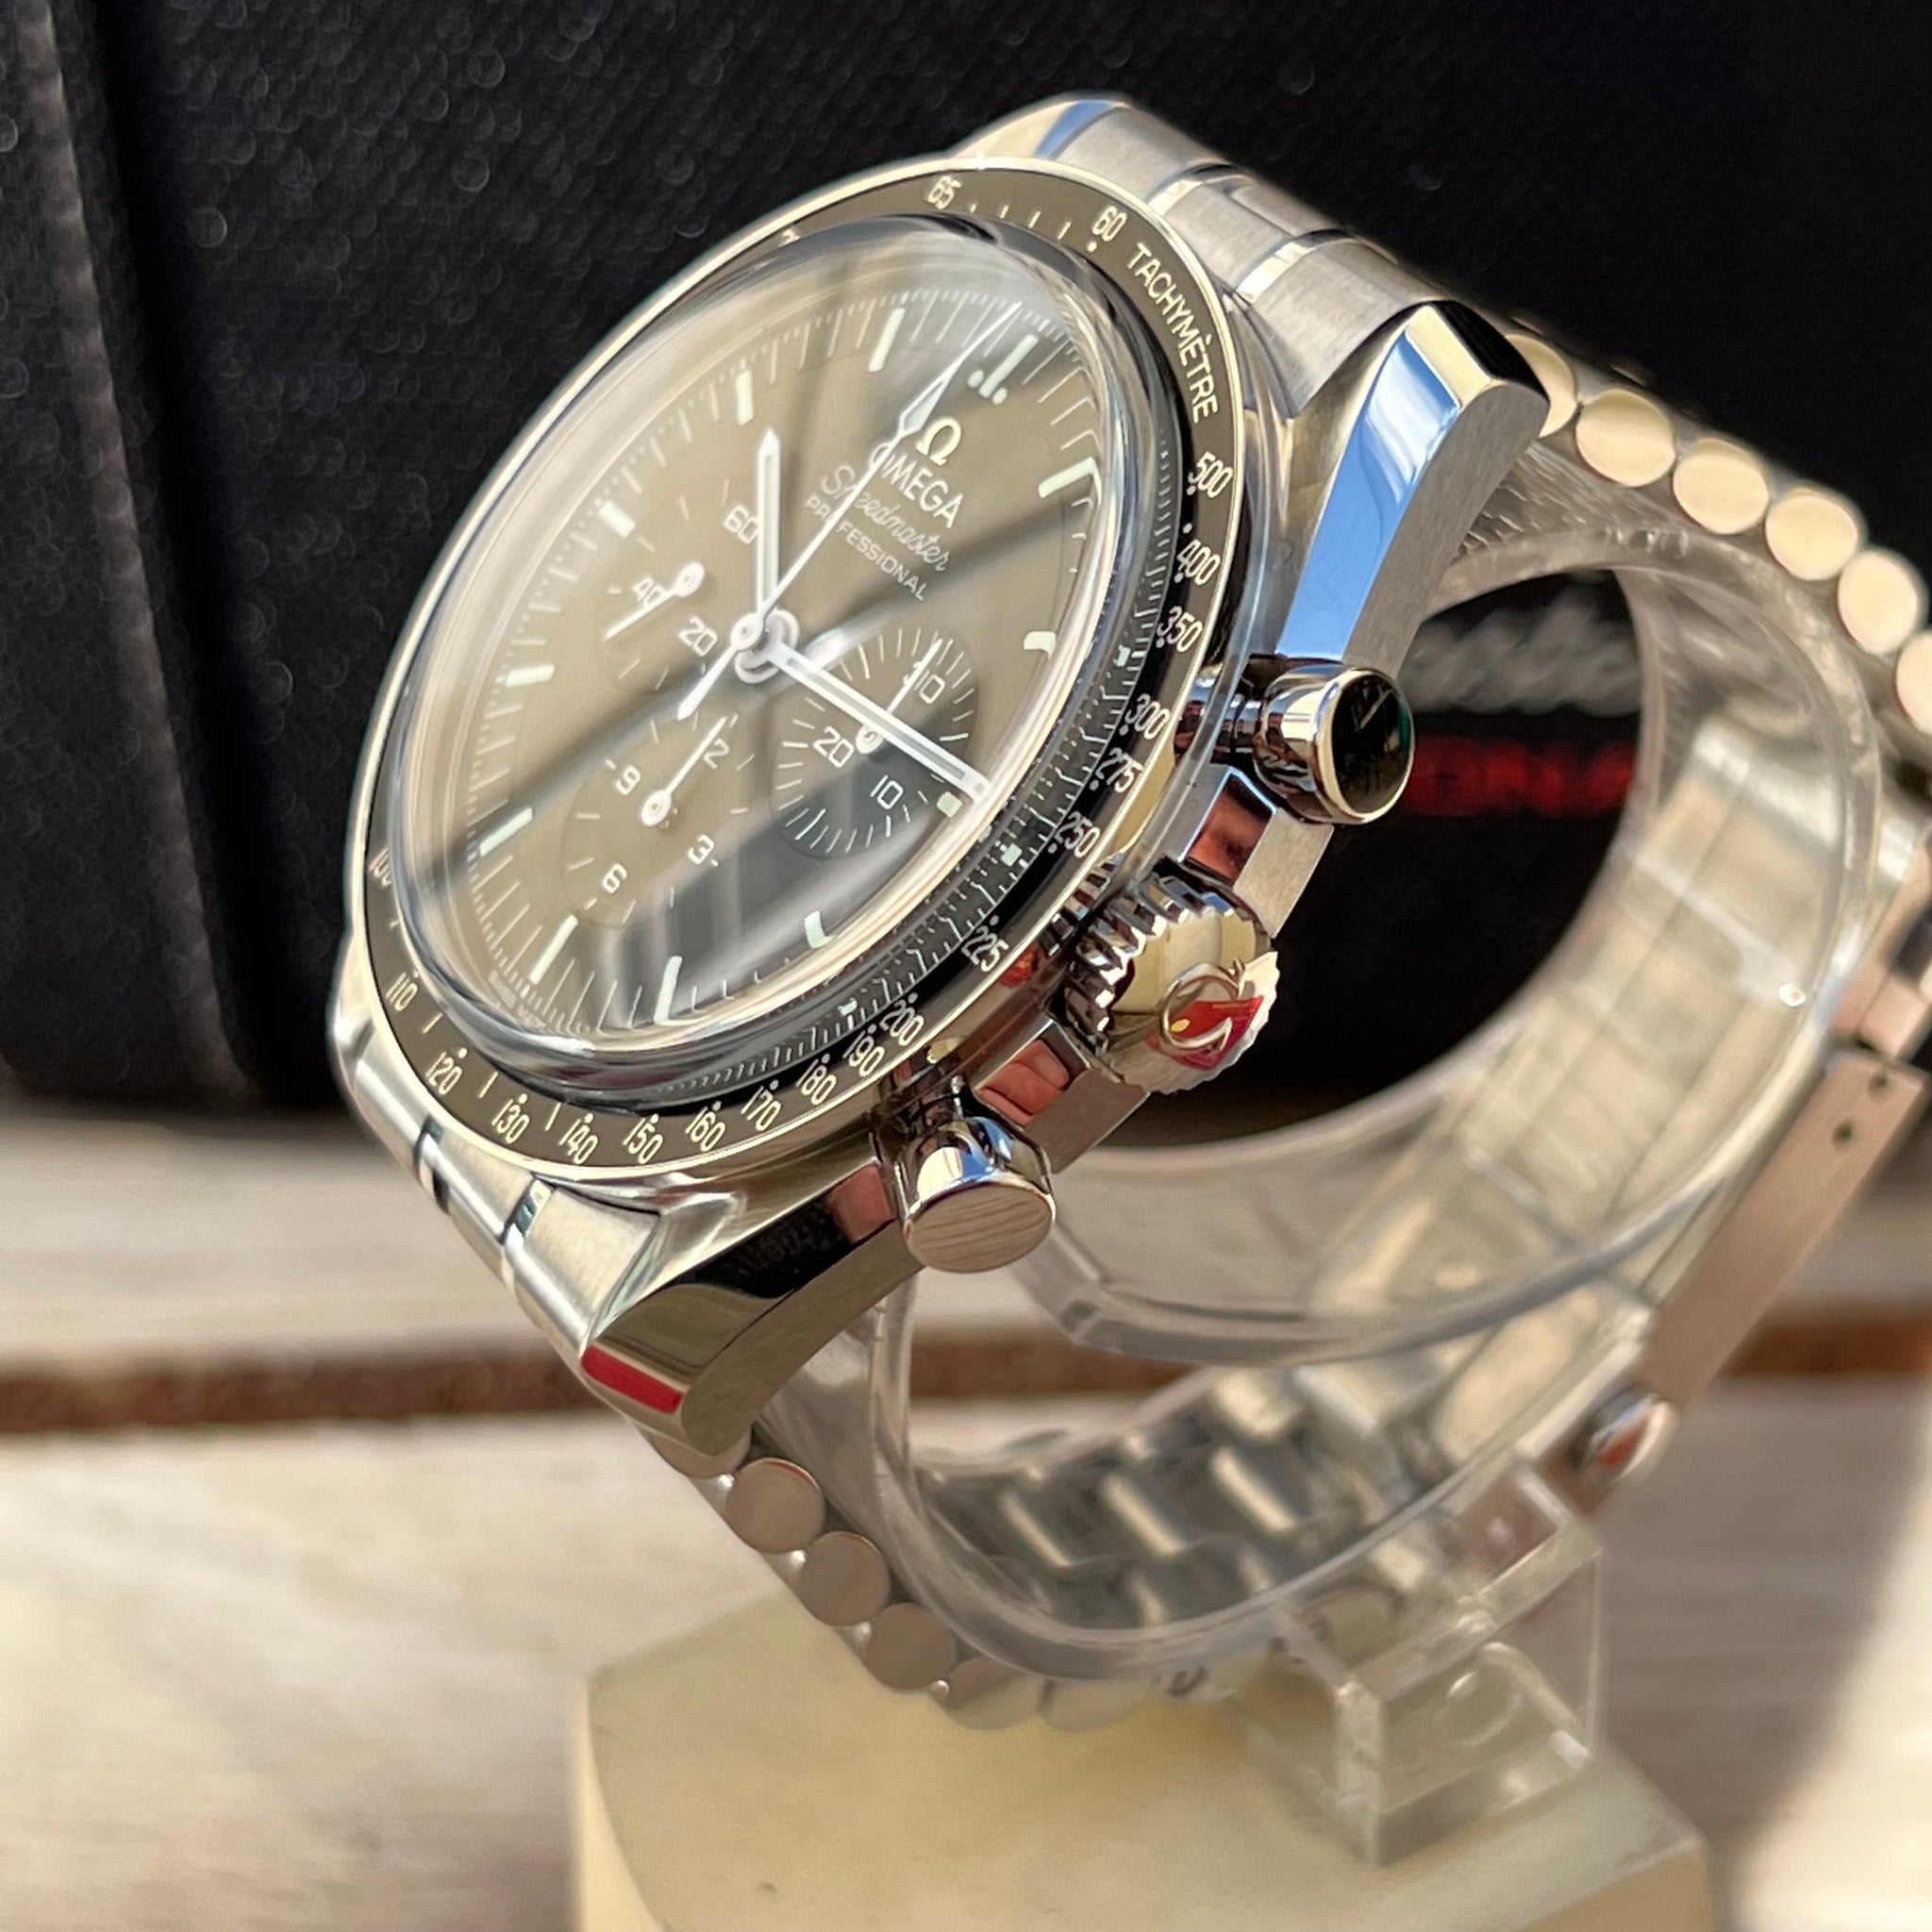 Omega Speedmaster Professional Co-Axial-.